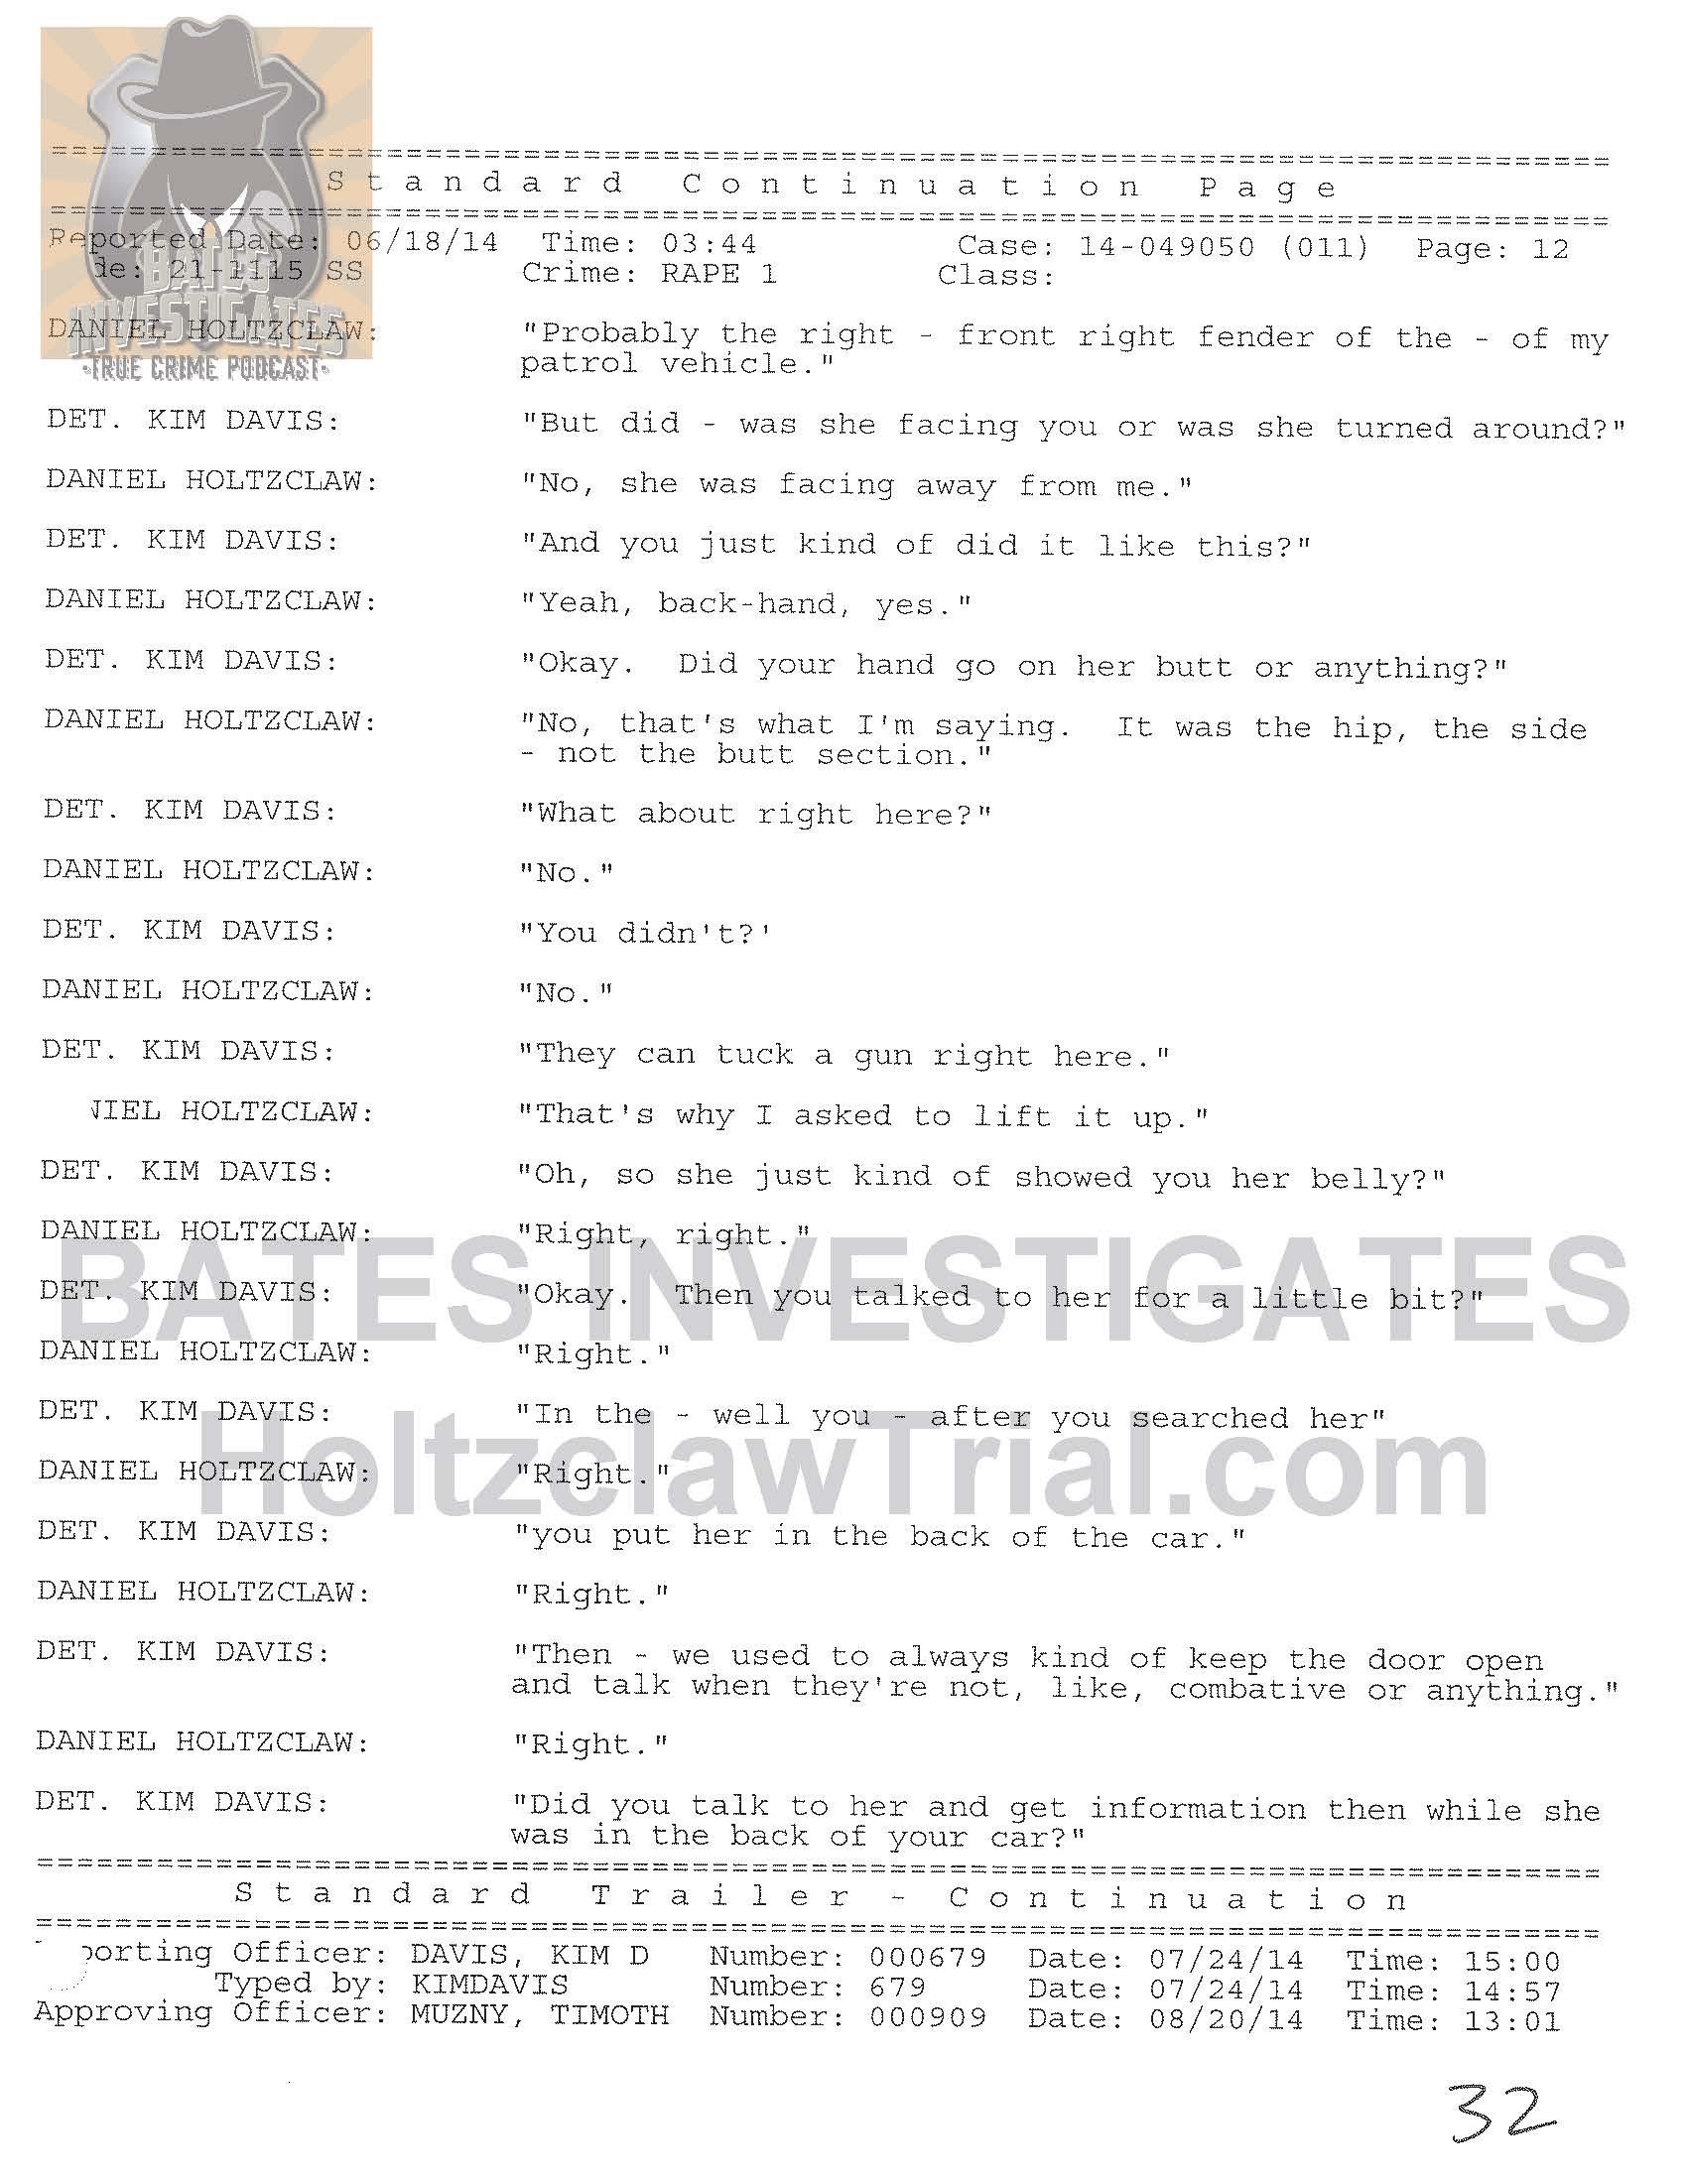 Holtzclaw Interrogation Transcript - Ep02 Redacted_Page_12.jpg